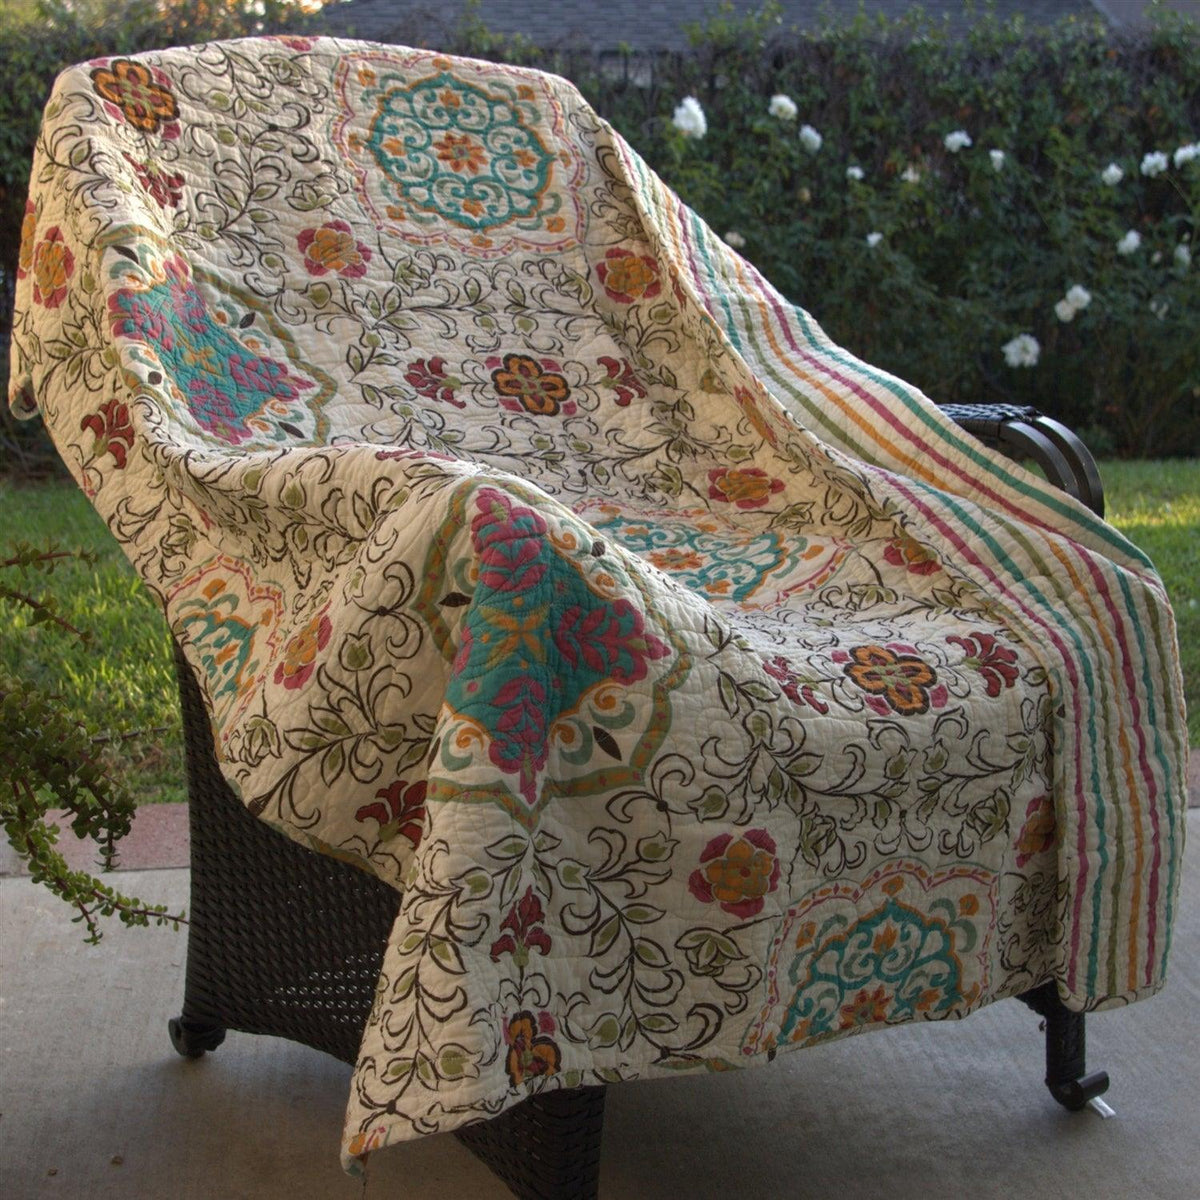 100% Cotton Throw Quilt Blanket with Bohemian Style Floral Pattern - beddingbag.com